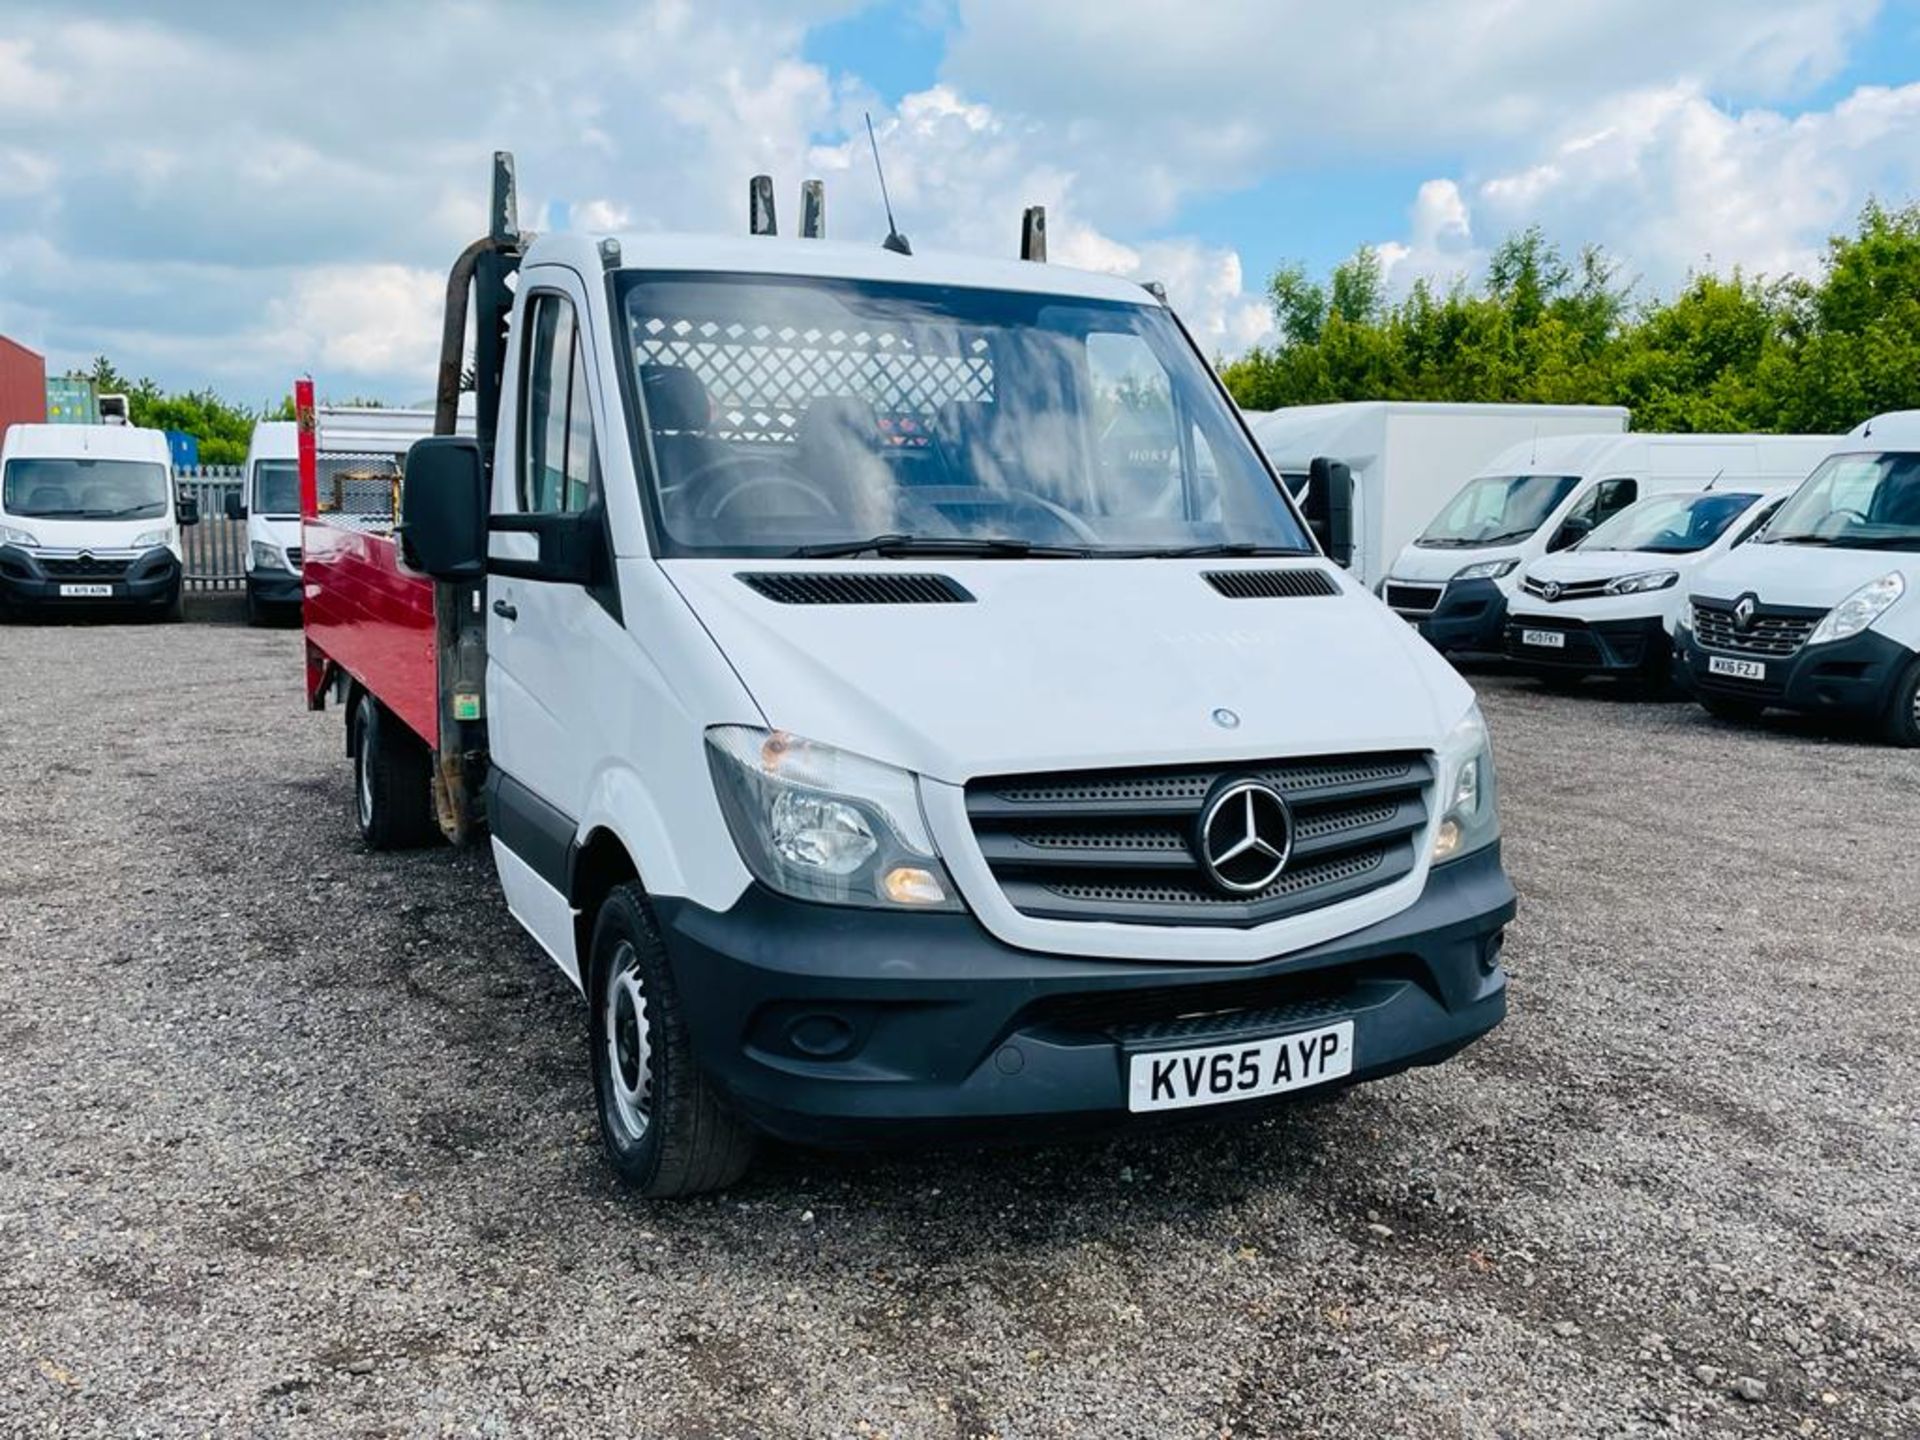 Mercedes Benz Sprinter 2.1 313 CDI L3 Alloy Dropside 2015 '65 Reg' - Cruise Control - Tail Lift - Image 2 of 21